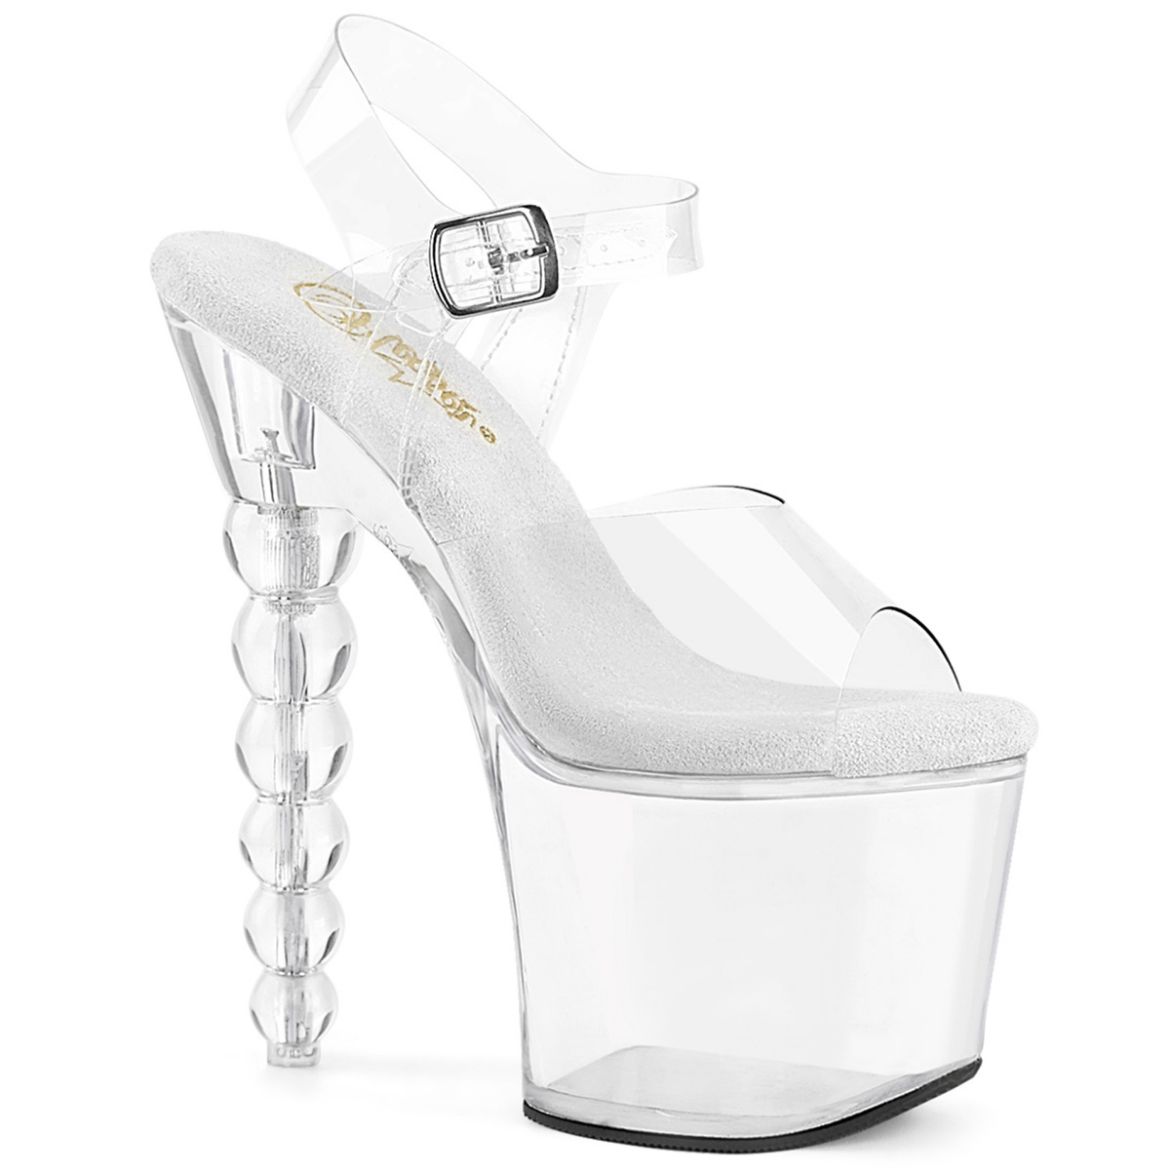 Product image of Pleaser BLISS-708 Clr/Clr 7 Inch Beaded Heel 3 1/4 Platform Ankle Strap Sandal